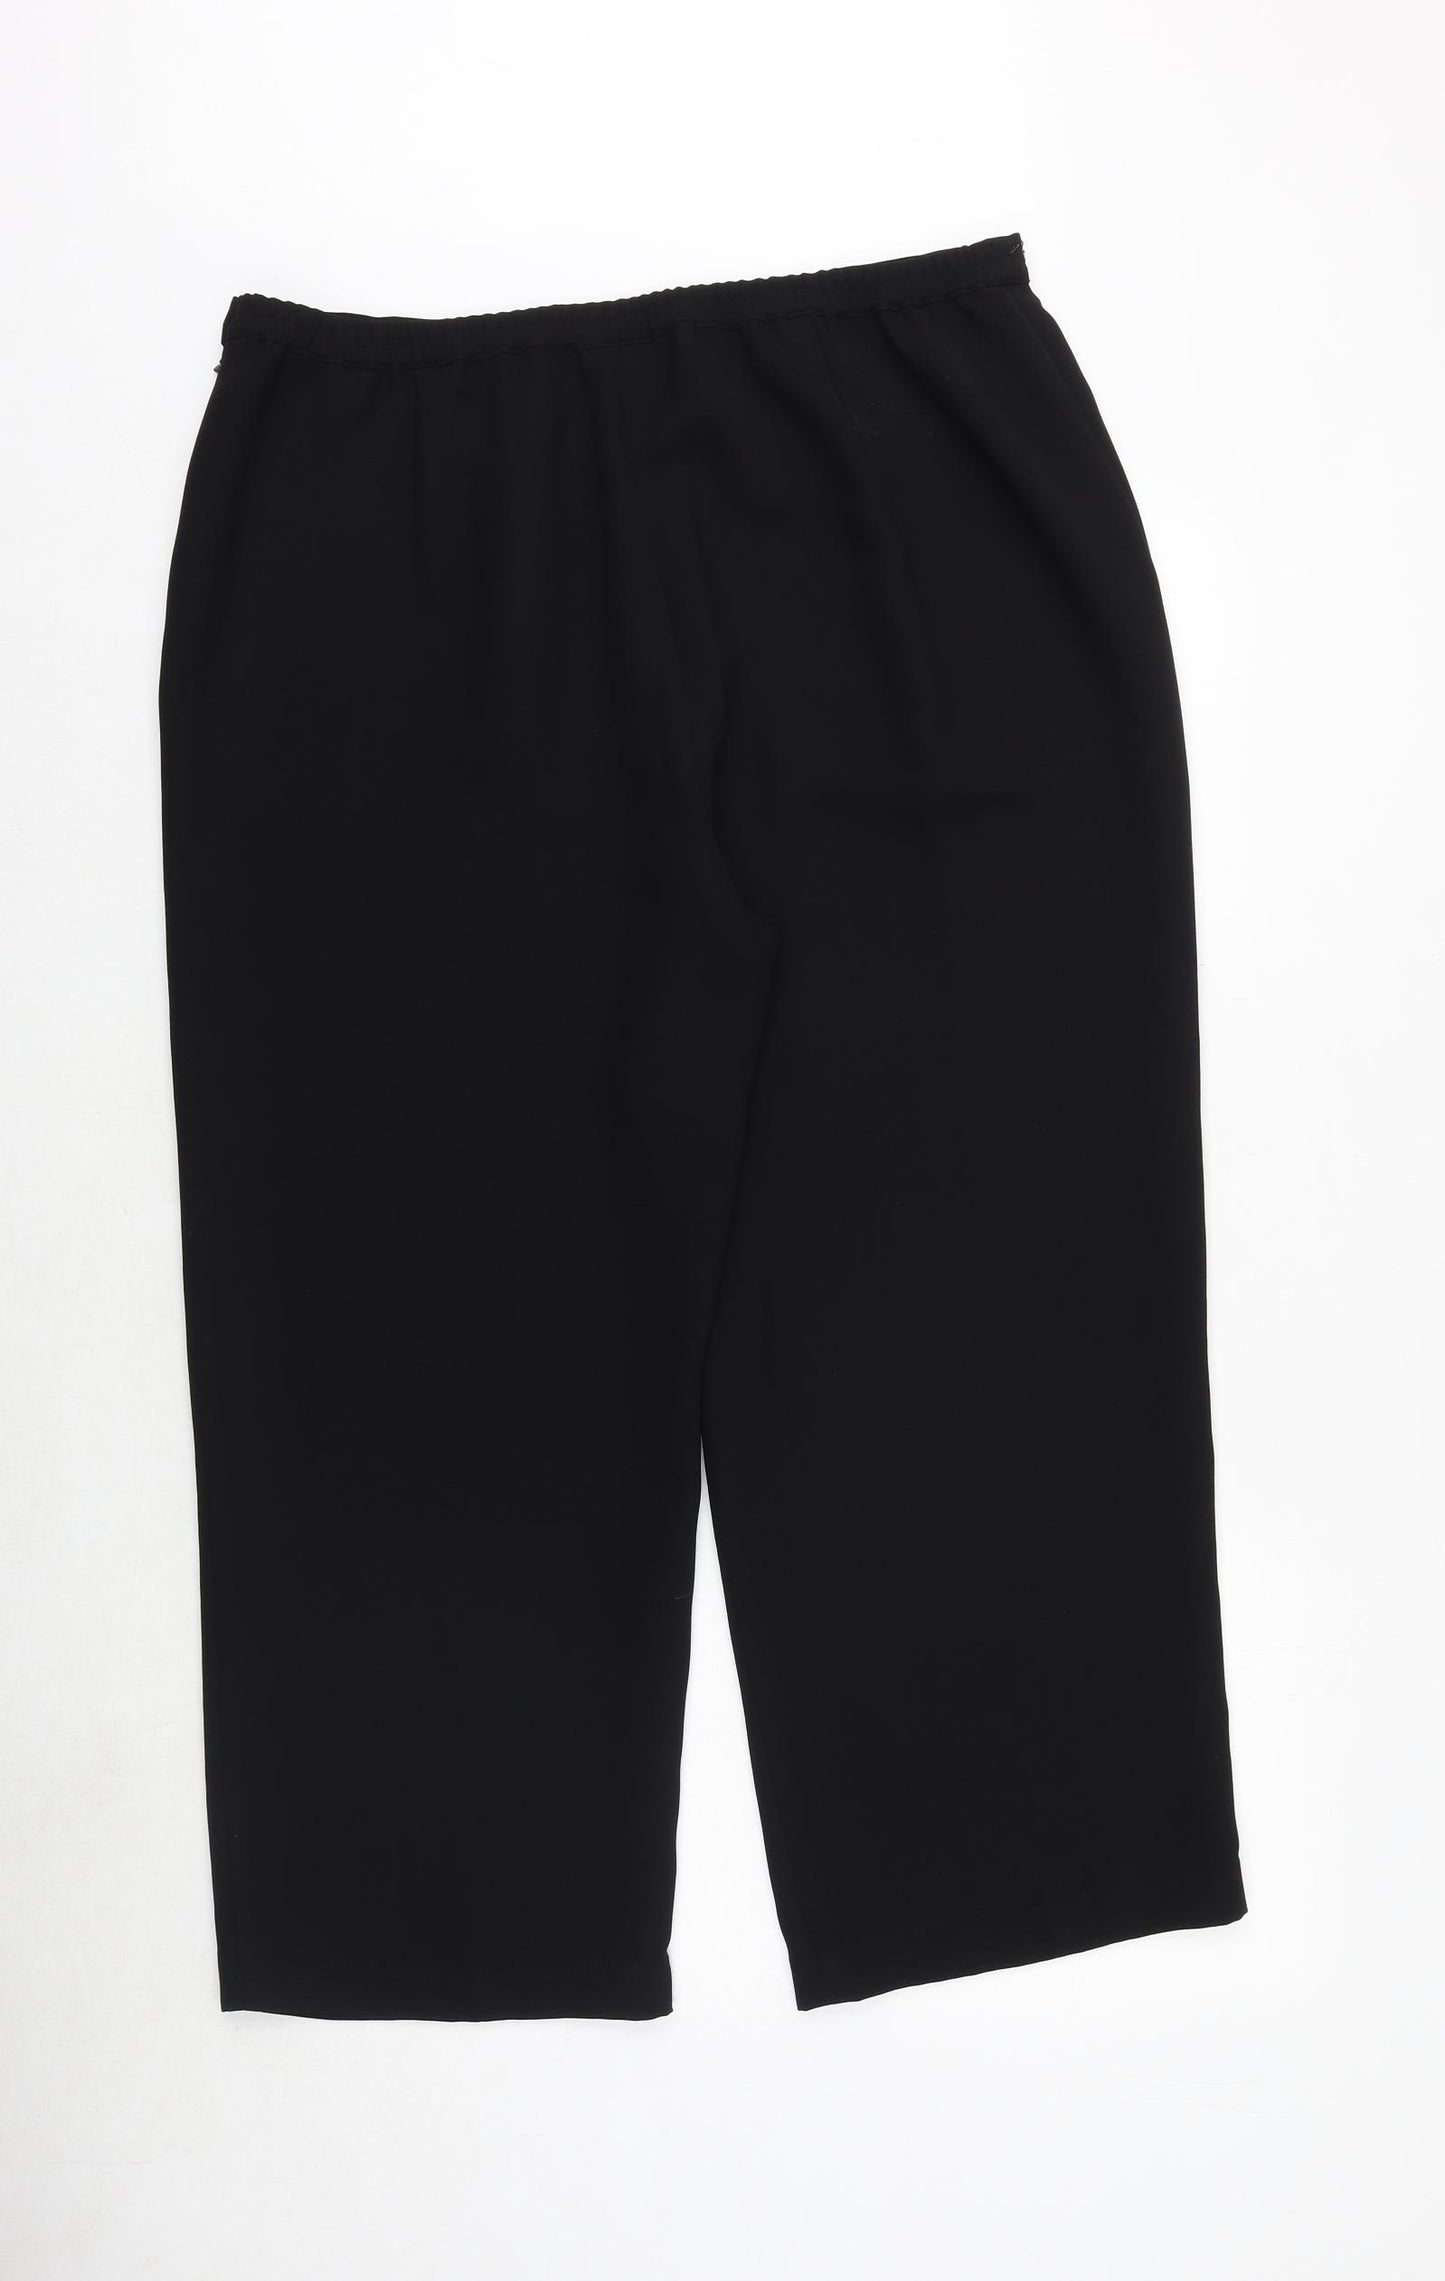 Eastex Womens Black Polyester Trousers Size 18 Regular Zip